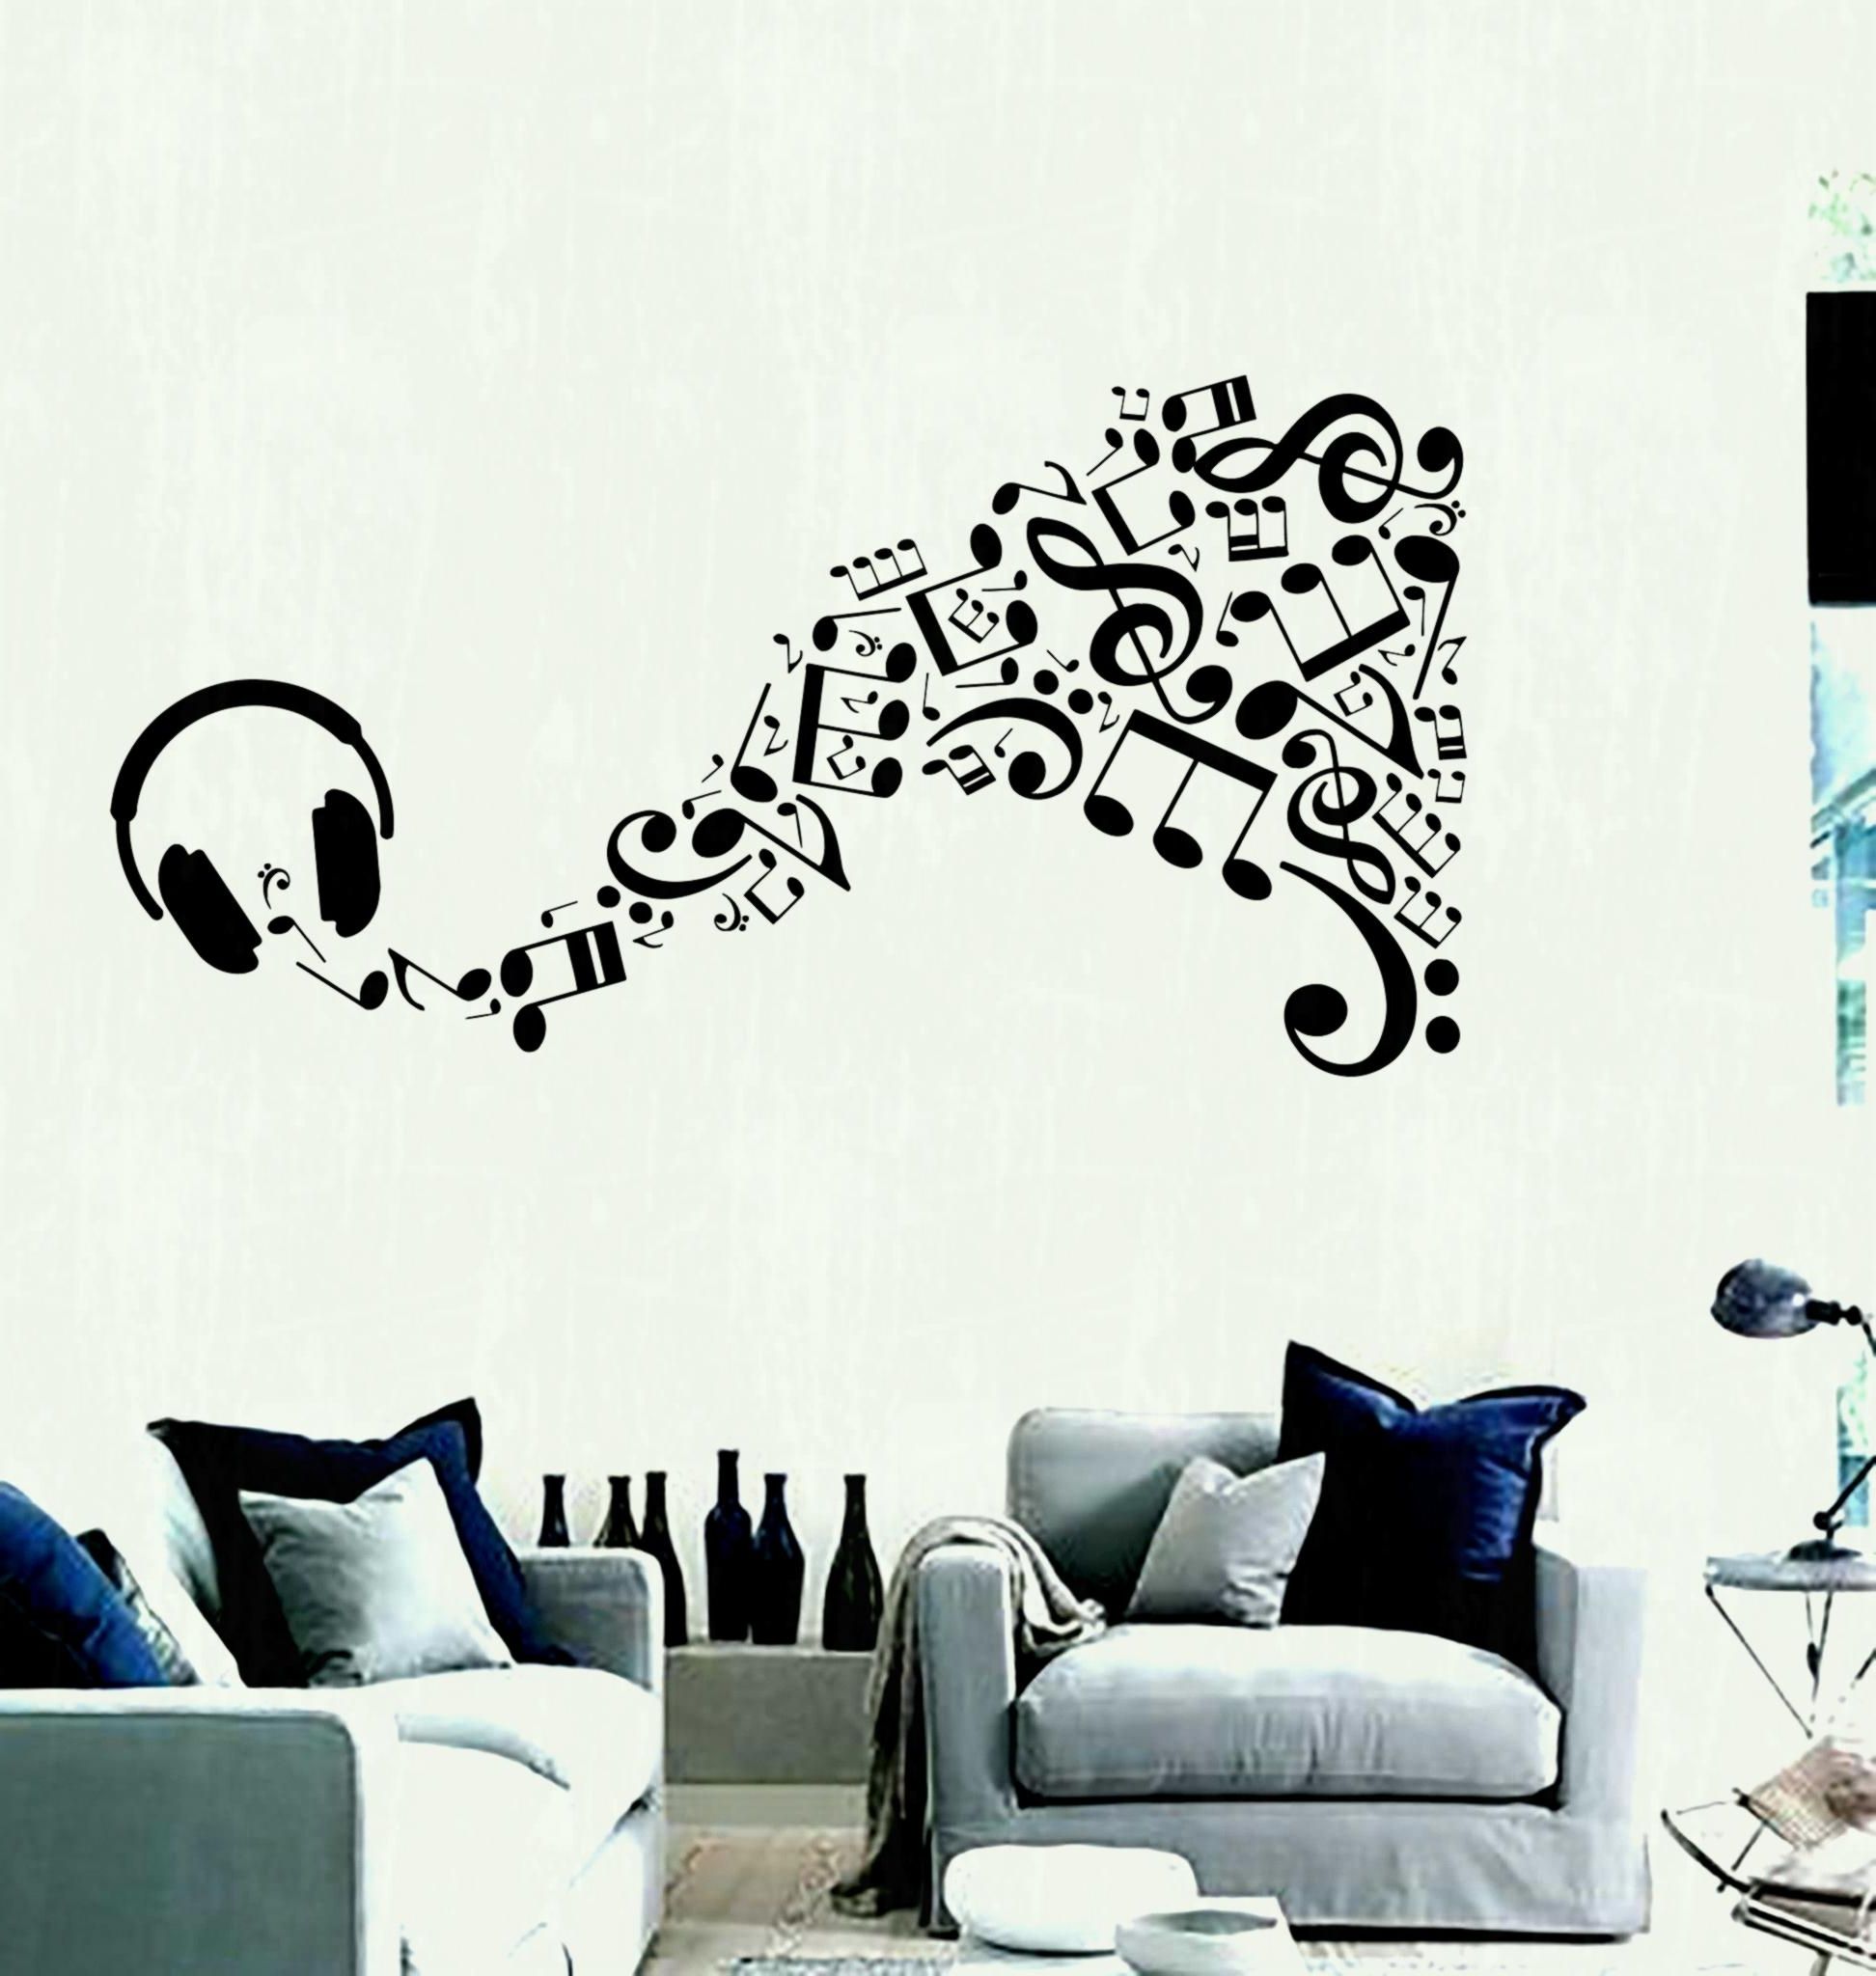 Living Room : Creative Painting Ideas For Walls With White Wall Intended For Best And Newest Art For Walls (View 7 of 20)